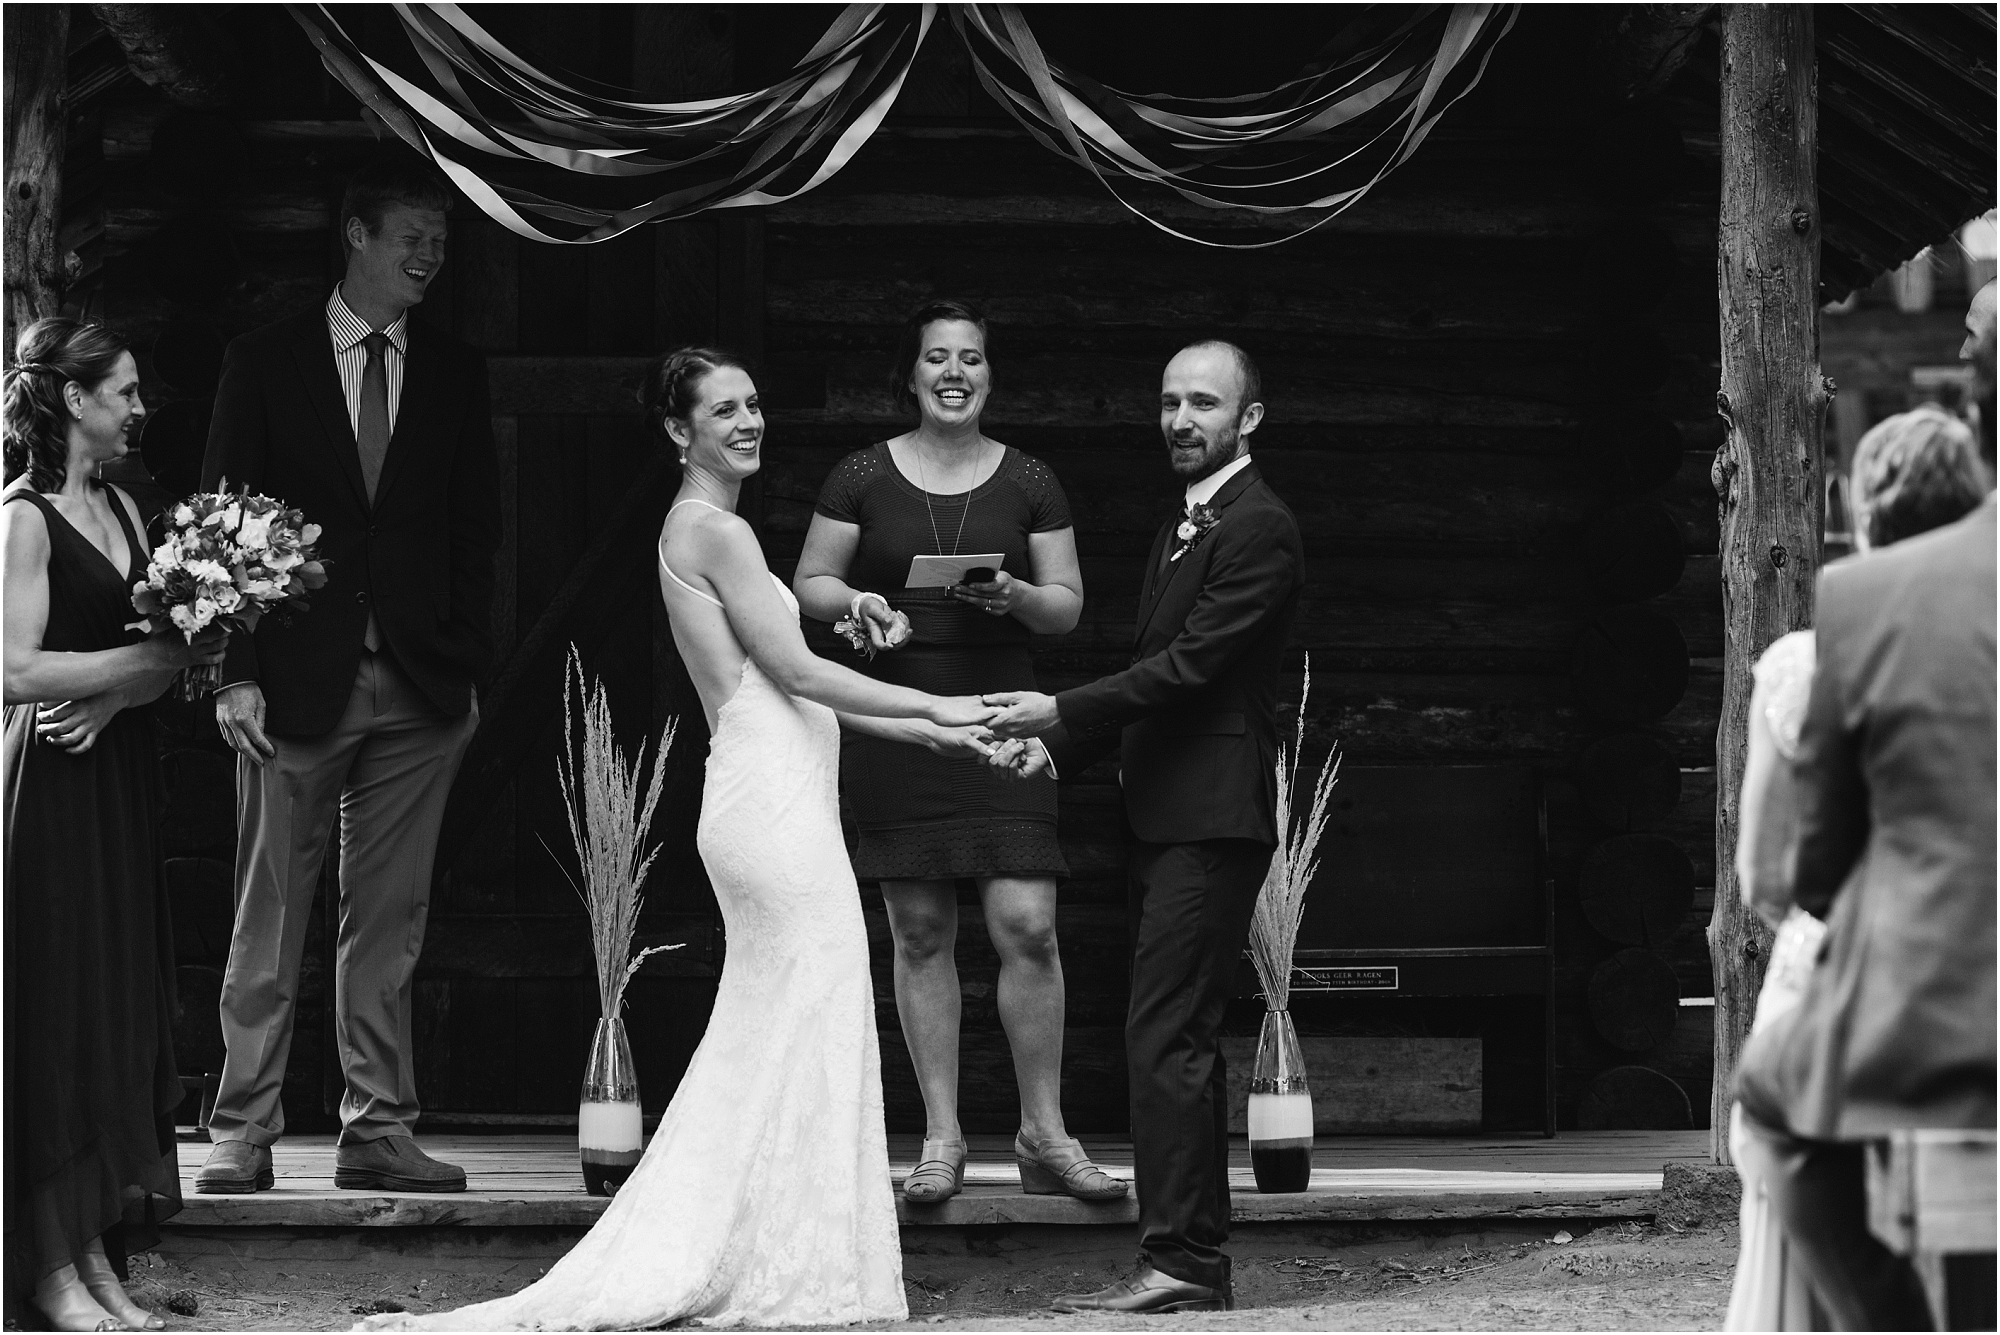 A beautiful black and white image of the bride and groom holding hands and smiling at their wedding guests during their rustic outdoor ceremony at the High Desert Museum wedding venue in Bend, OR. | Erica Swantek Photography